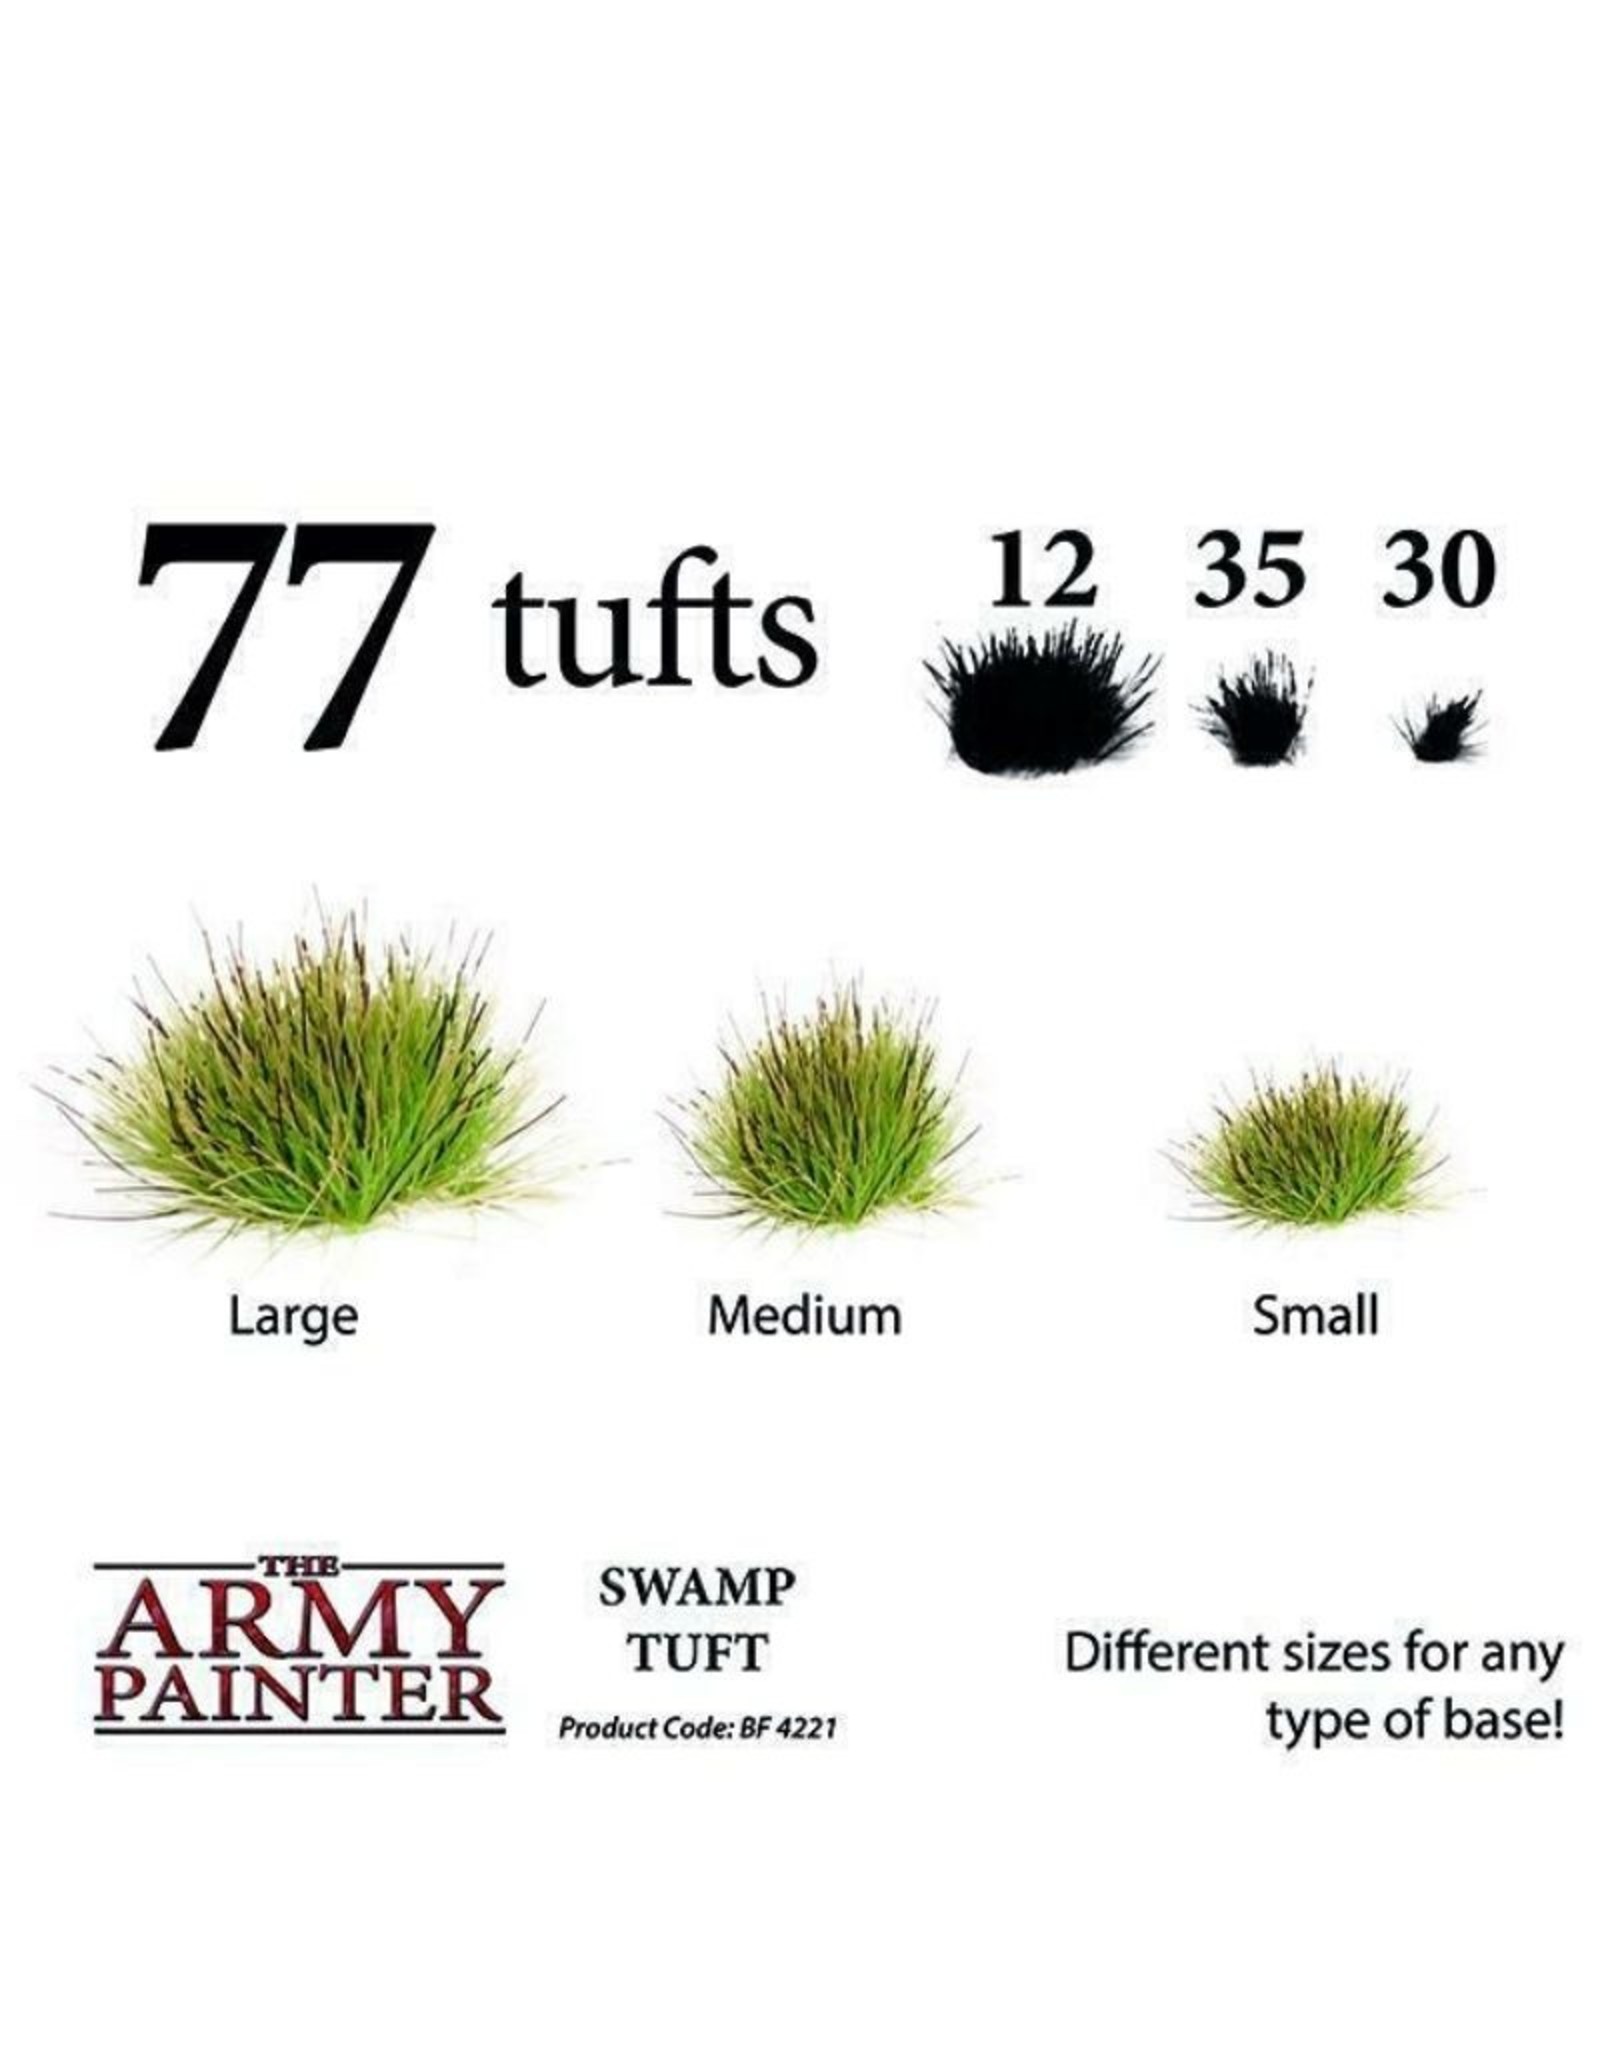 The Army Painter Battlefield Foliage: Swamp Tuft